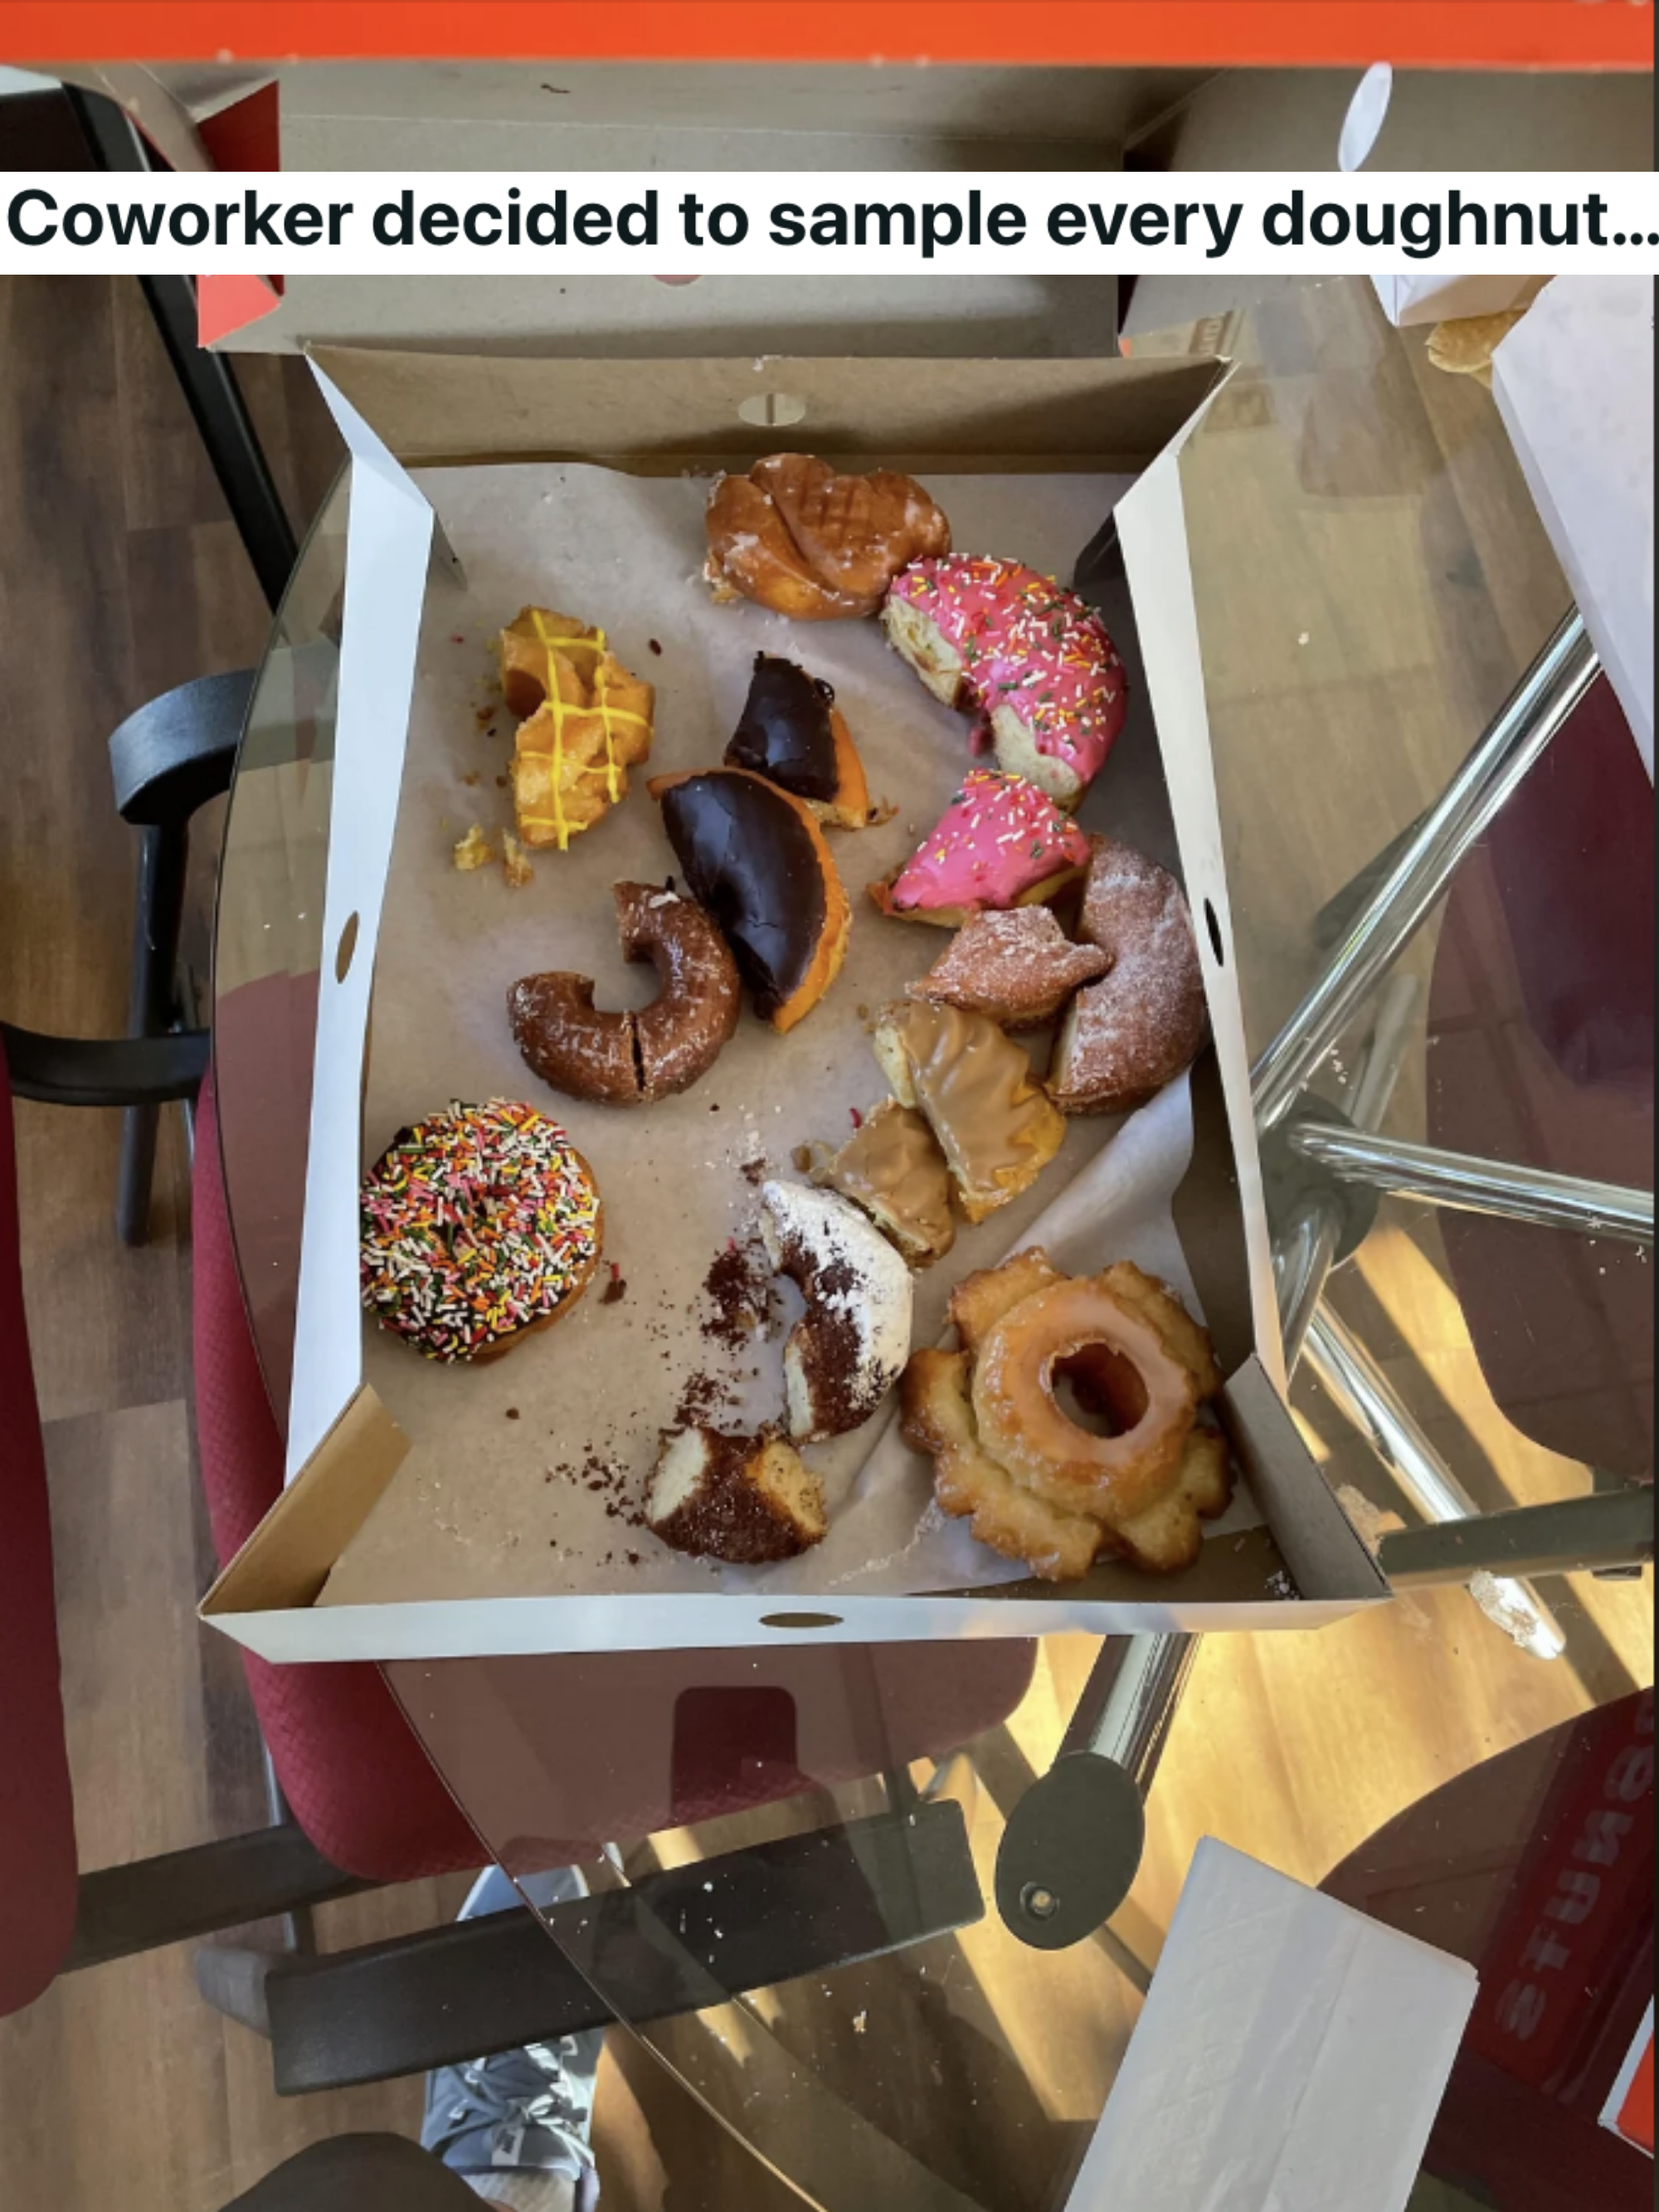 Doughnuts with bites missing